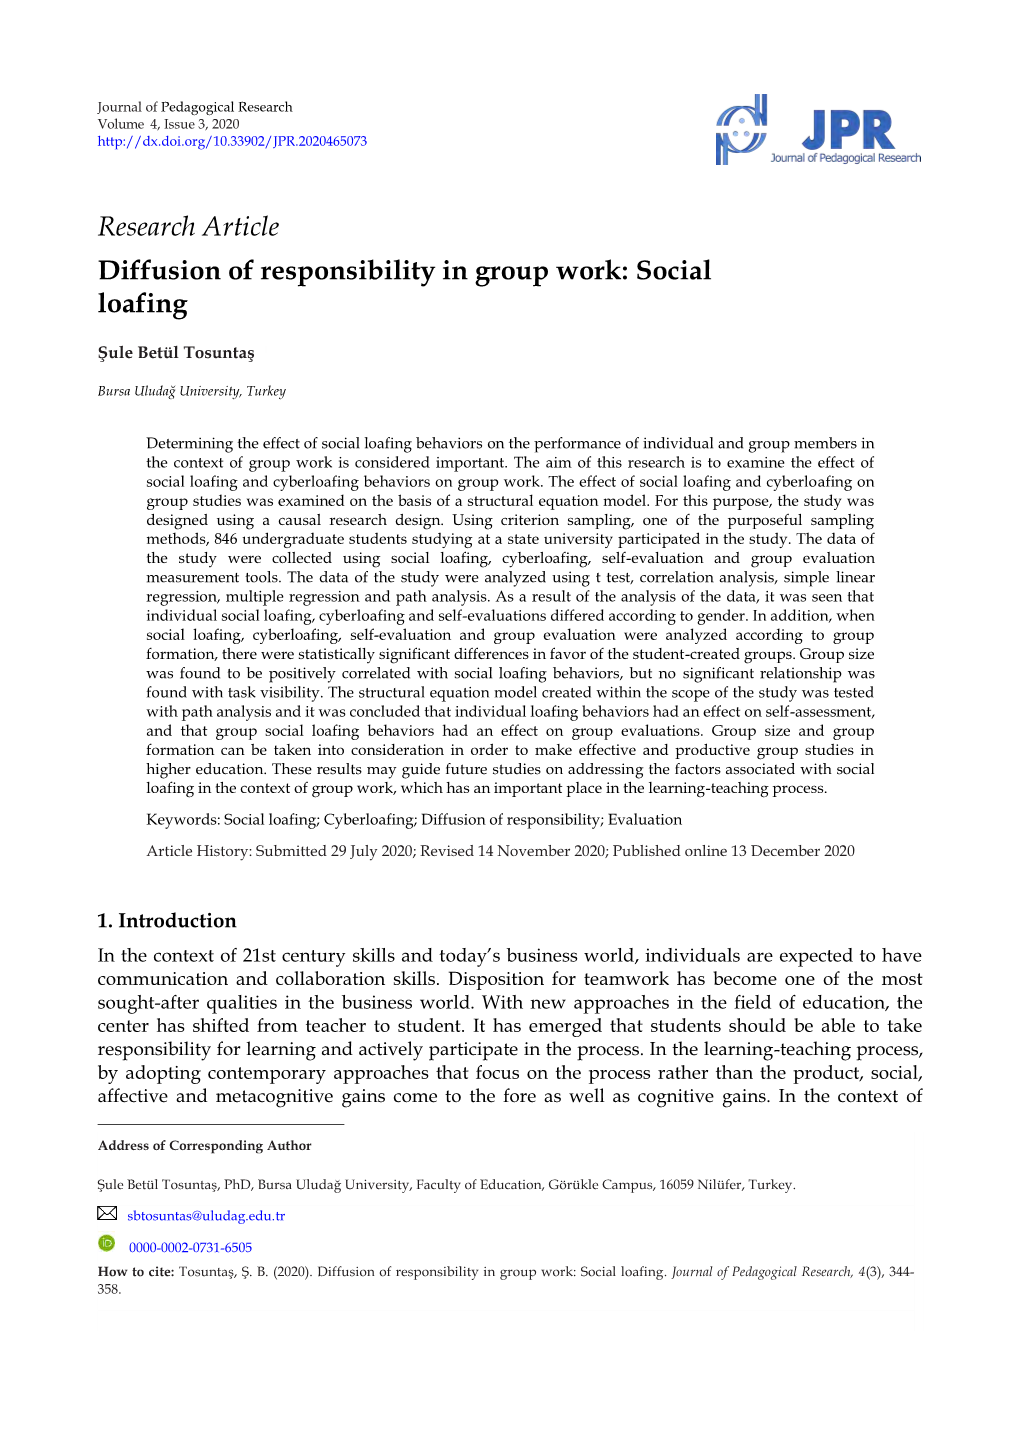 Research Article Diffusion of Responsibility in Group Work: Social Loafing